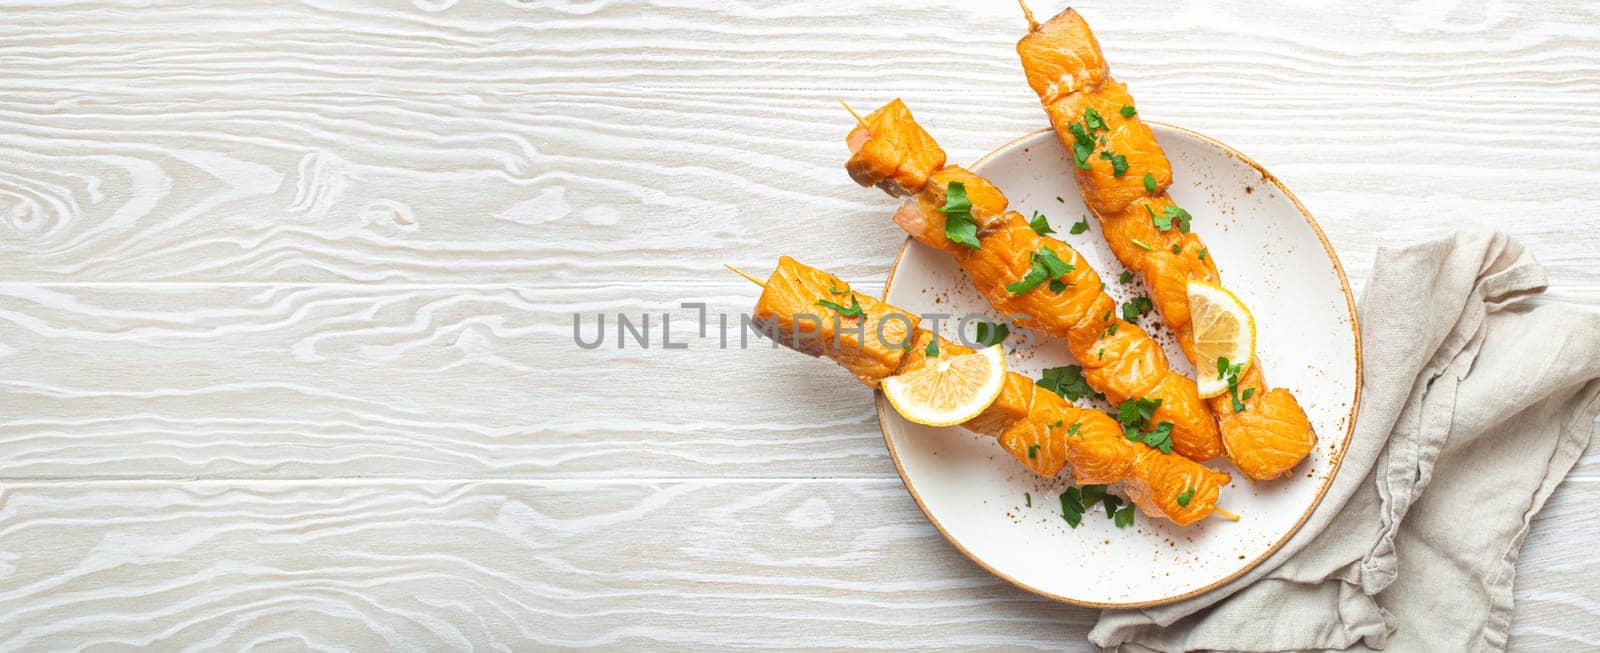 Grilled barbecue salmon skewers seasoned with green parsley and lemon on ceramic plate on white wooden rustic table background top view, healthy eating by its_al_dente